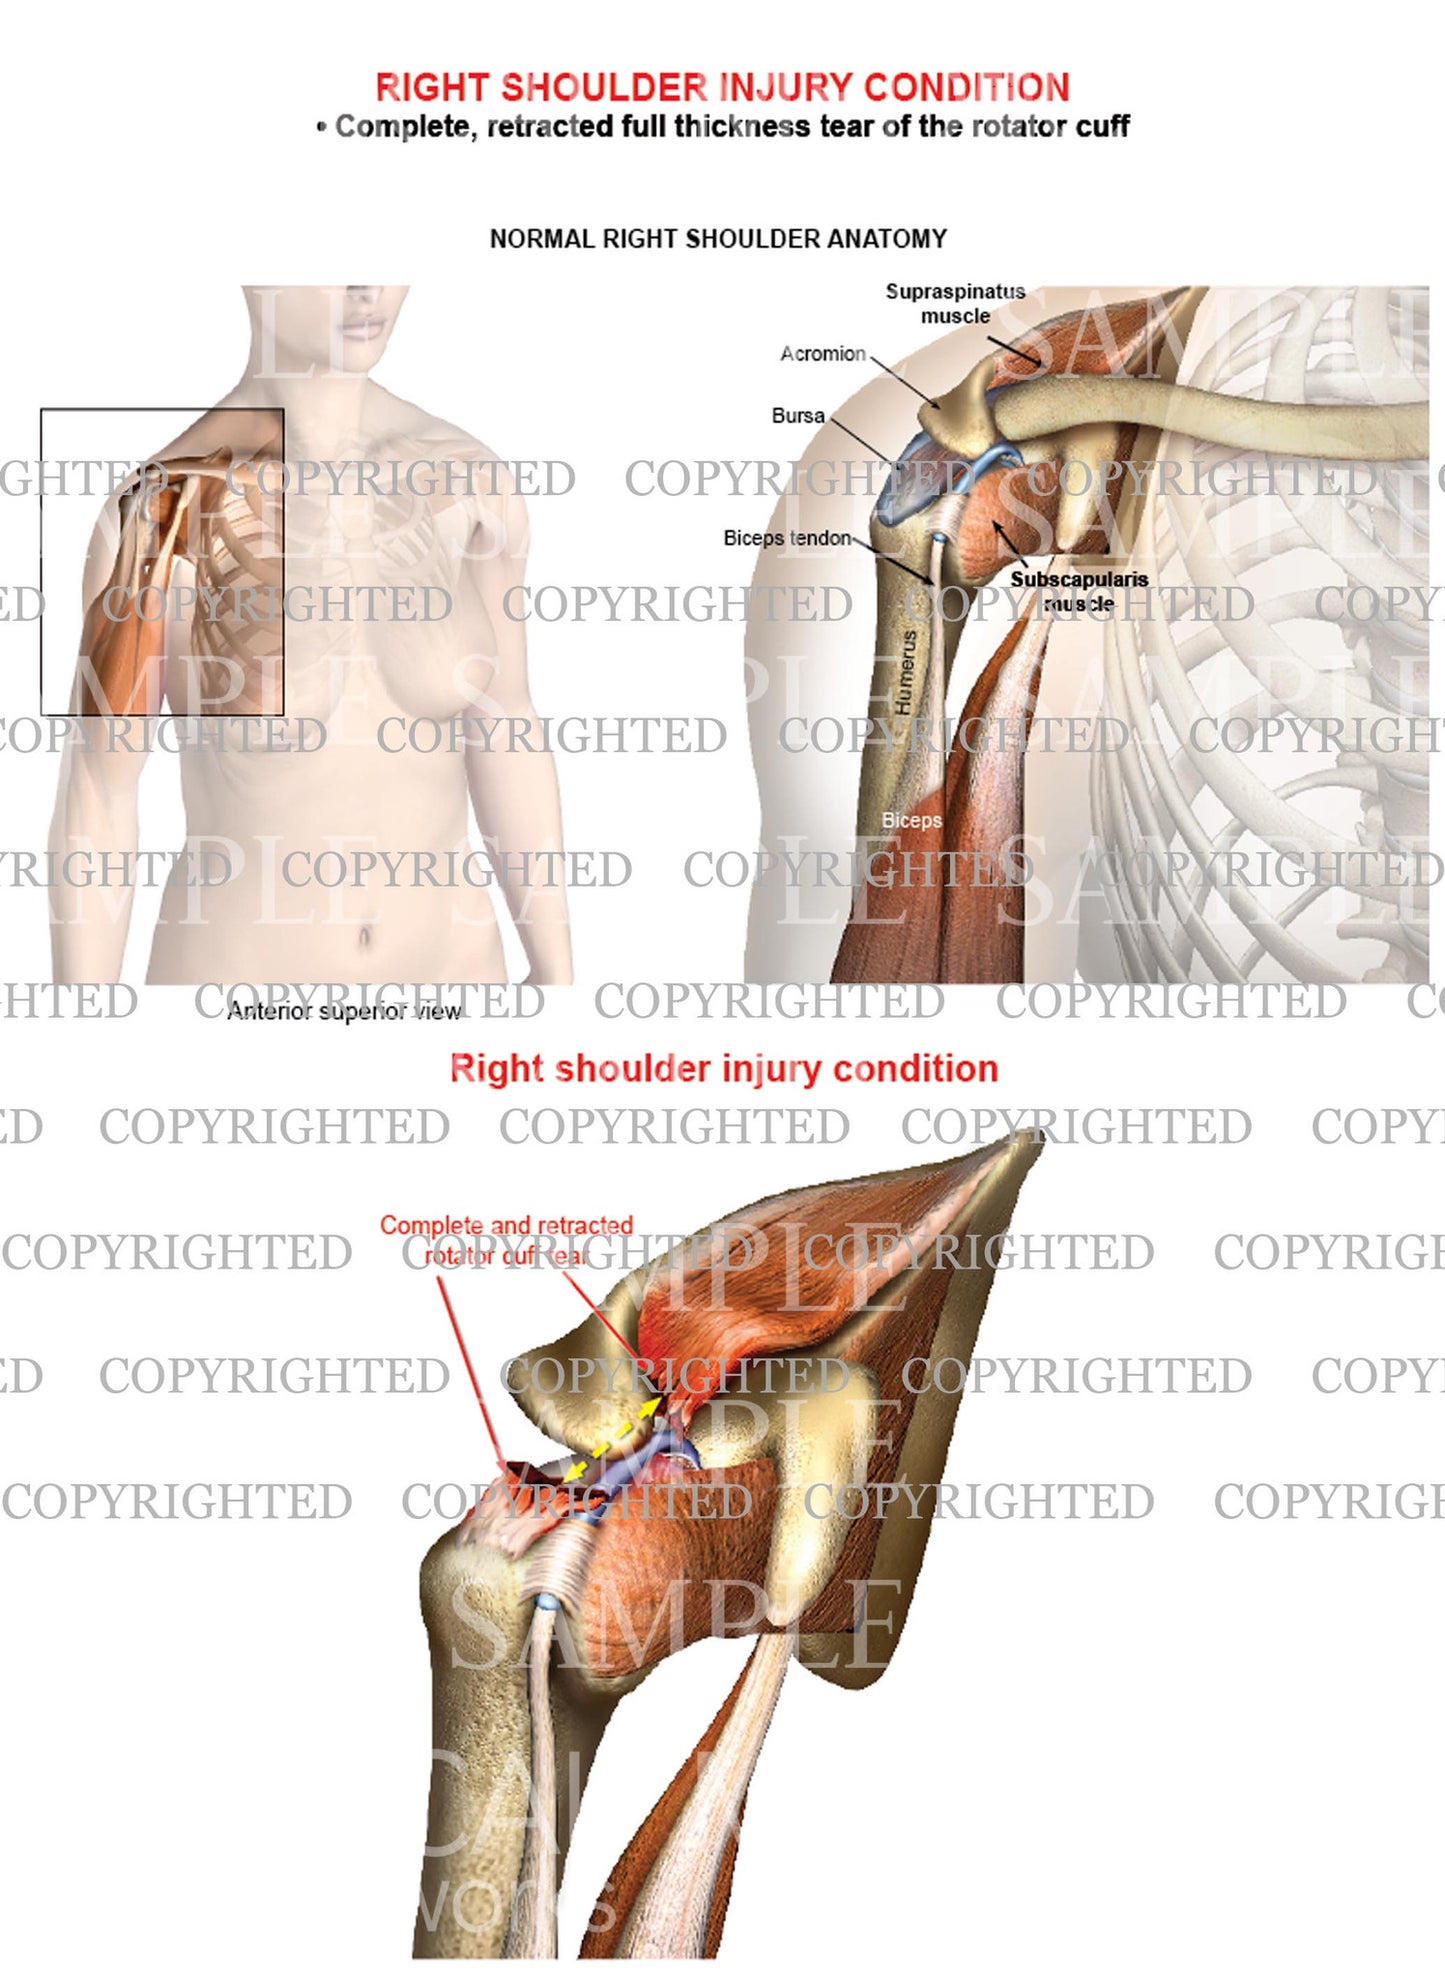 Right shoulder rotator cuff complete retracted tear - Female